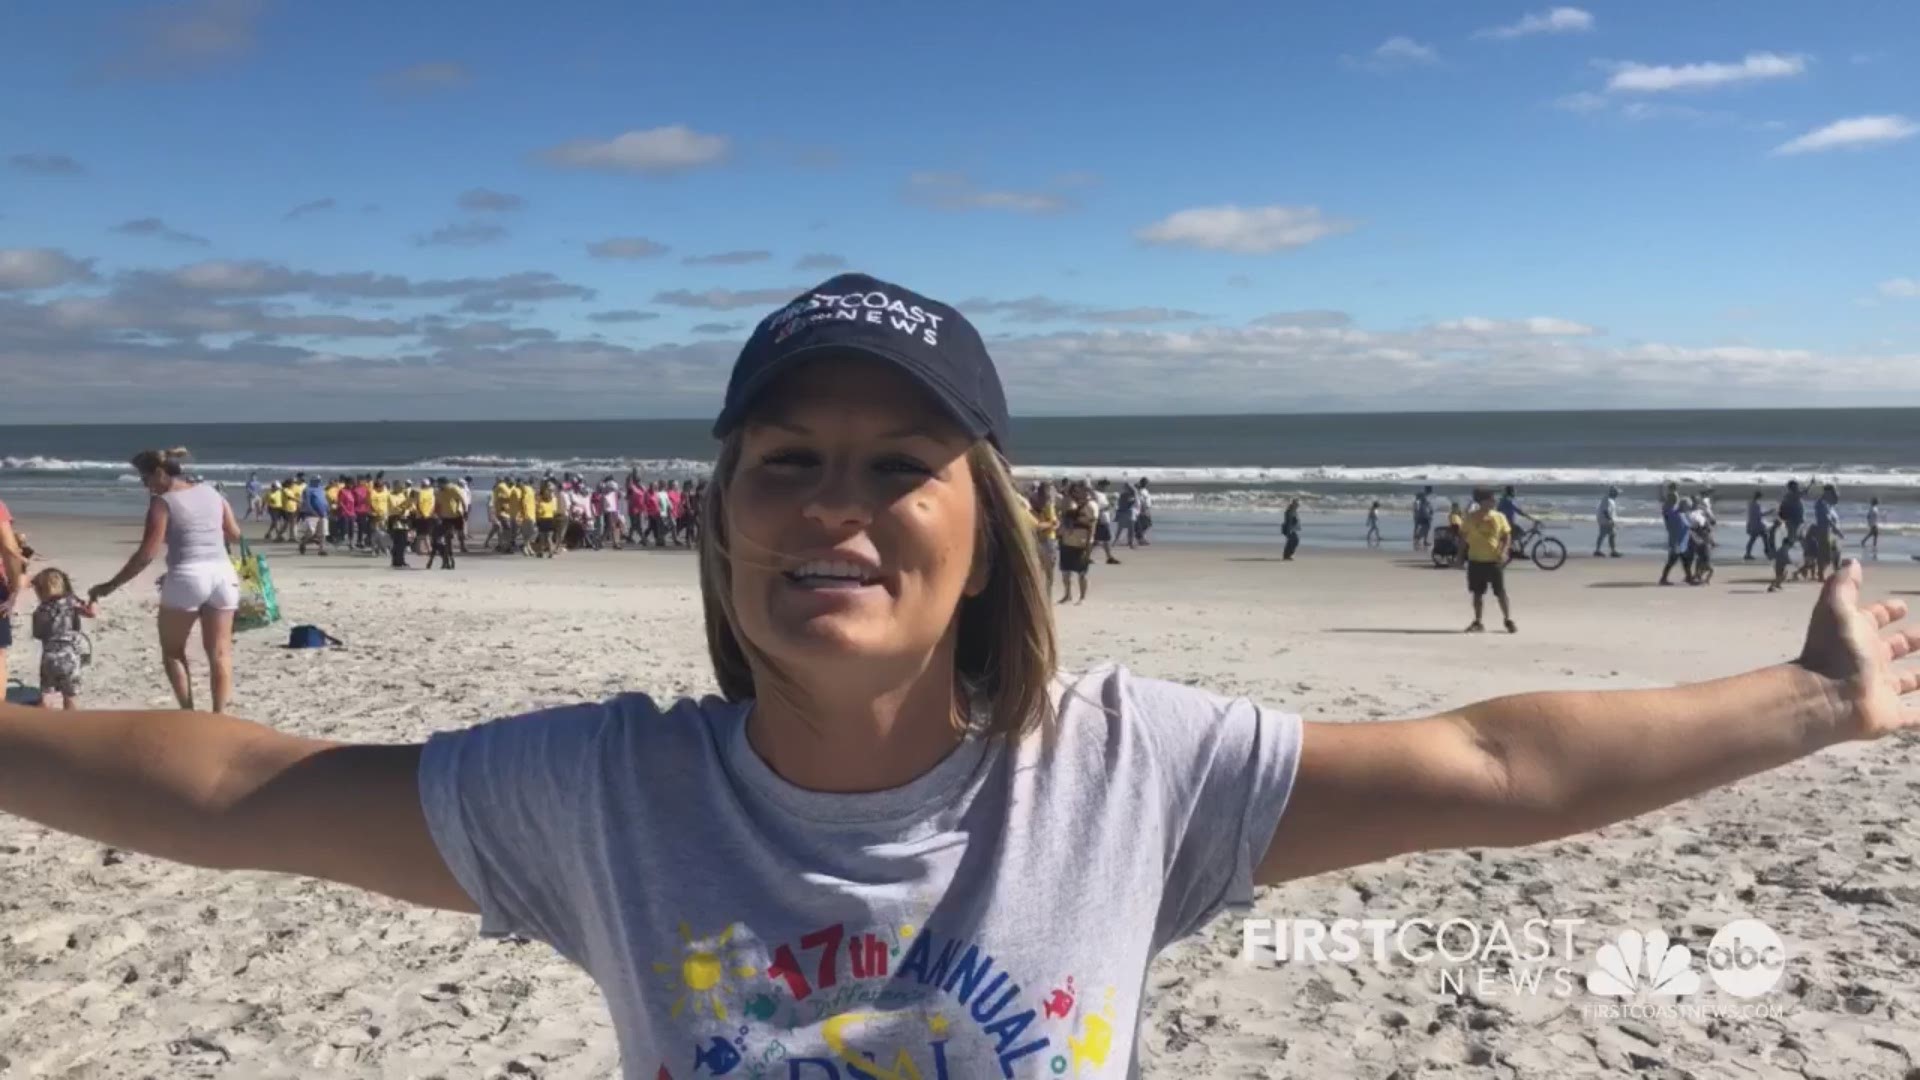 Meteorologist Lauren Rautenkranz and the Down Syndrome Association of Jacksonville are at Jacksonville Beach for the 17th annual Buddy walk!